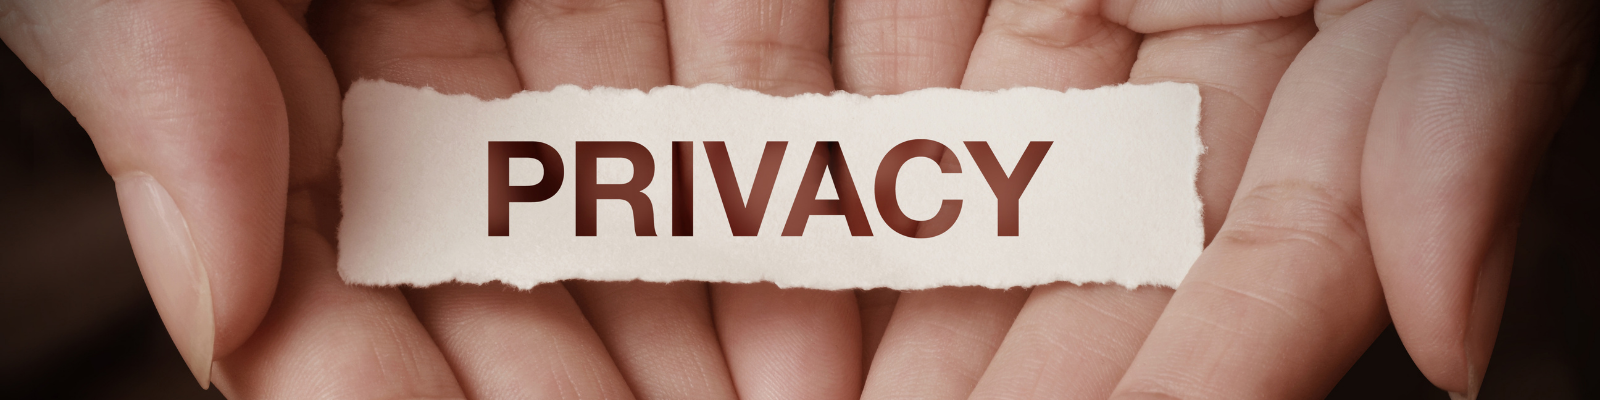 Privacy Banner - MROO